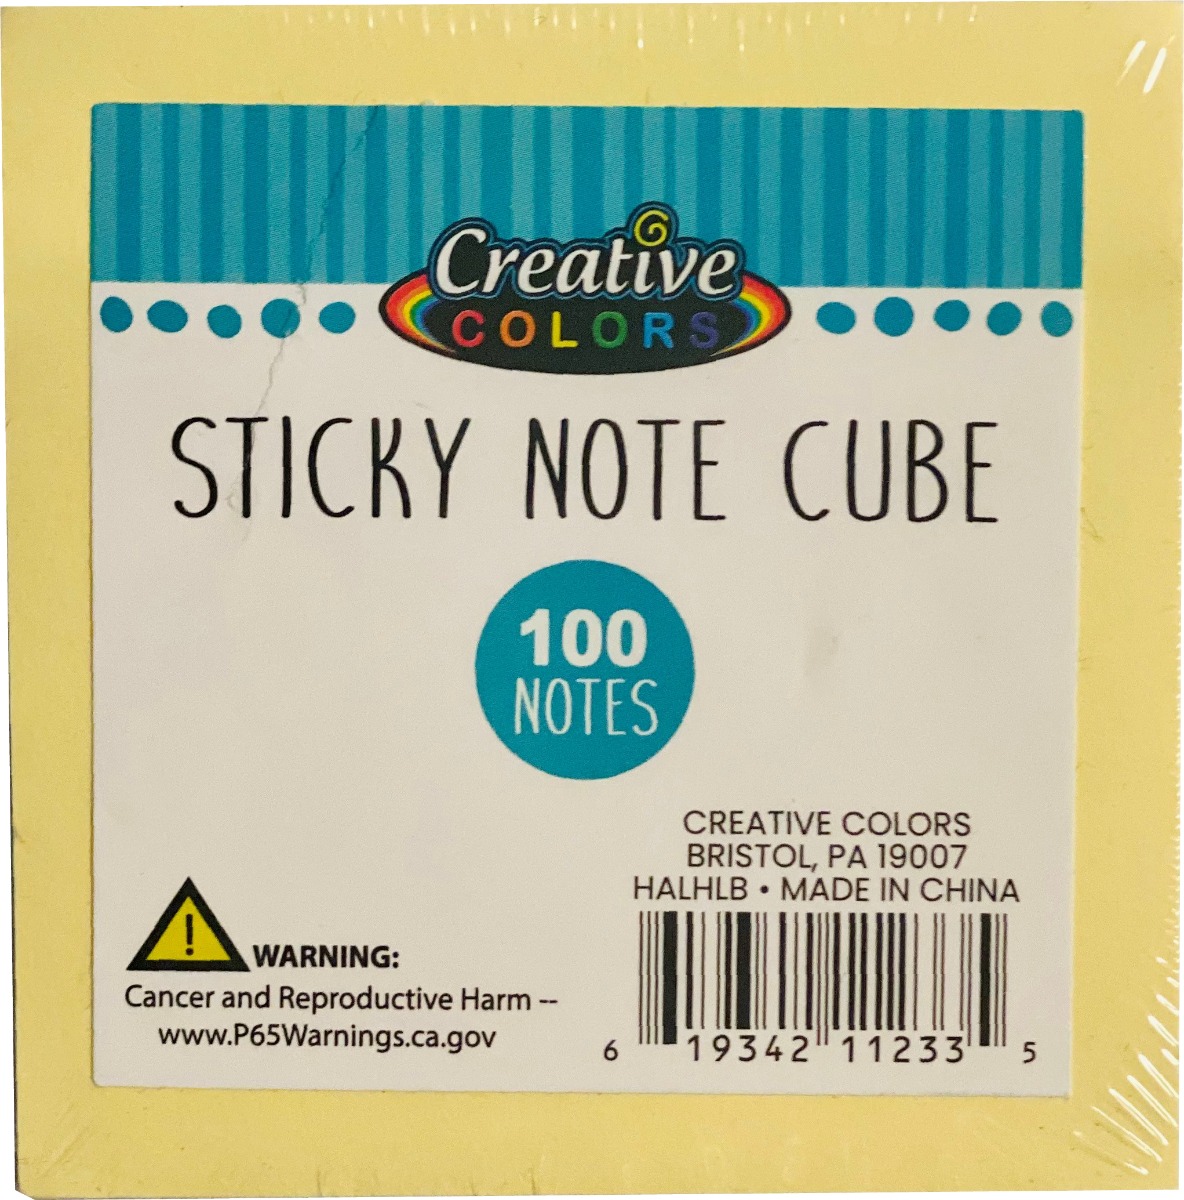 Creative Colors Sticky Note Pads - 100-Pack